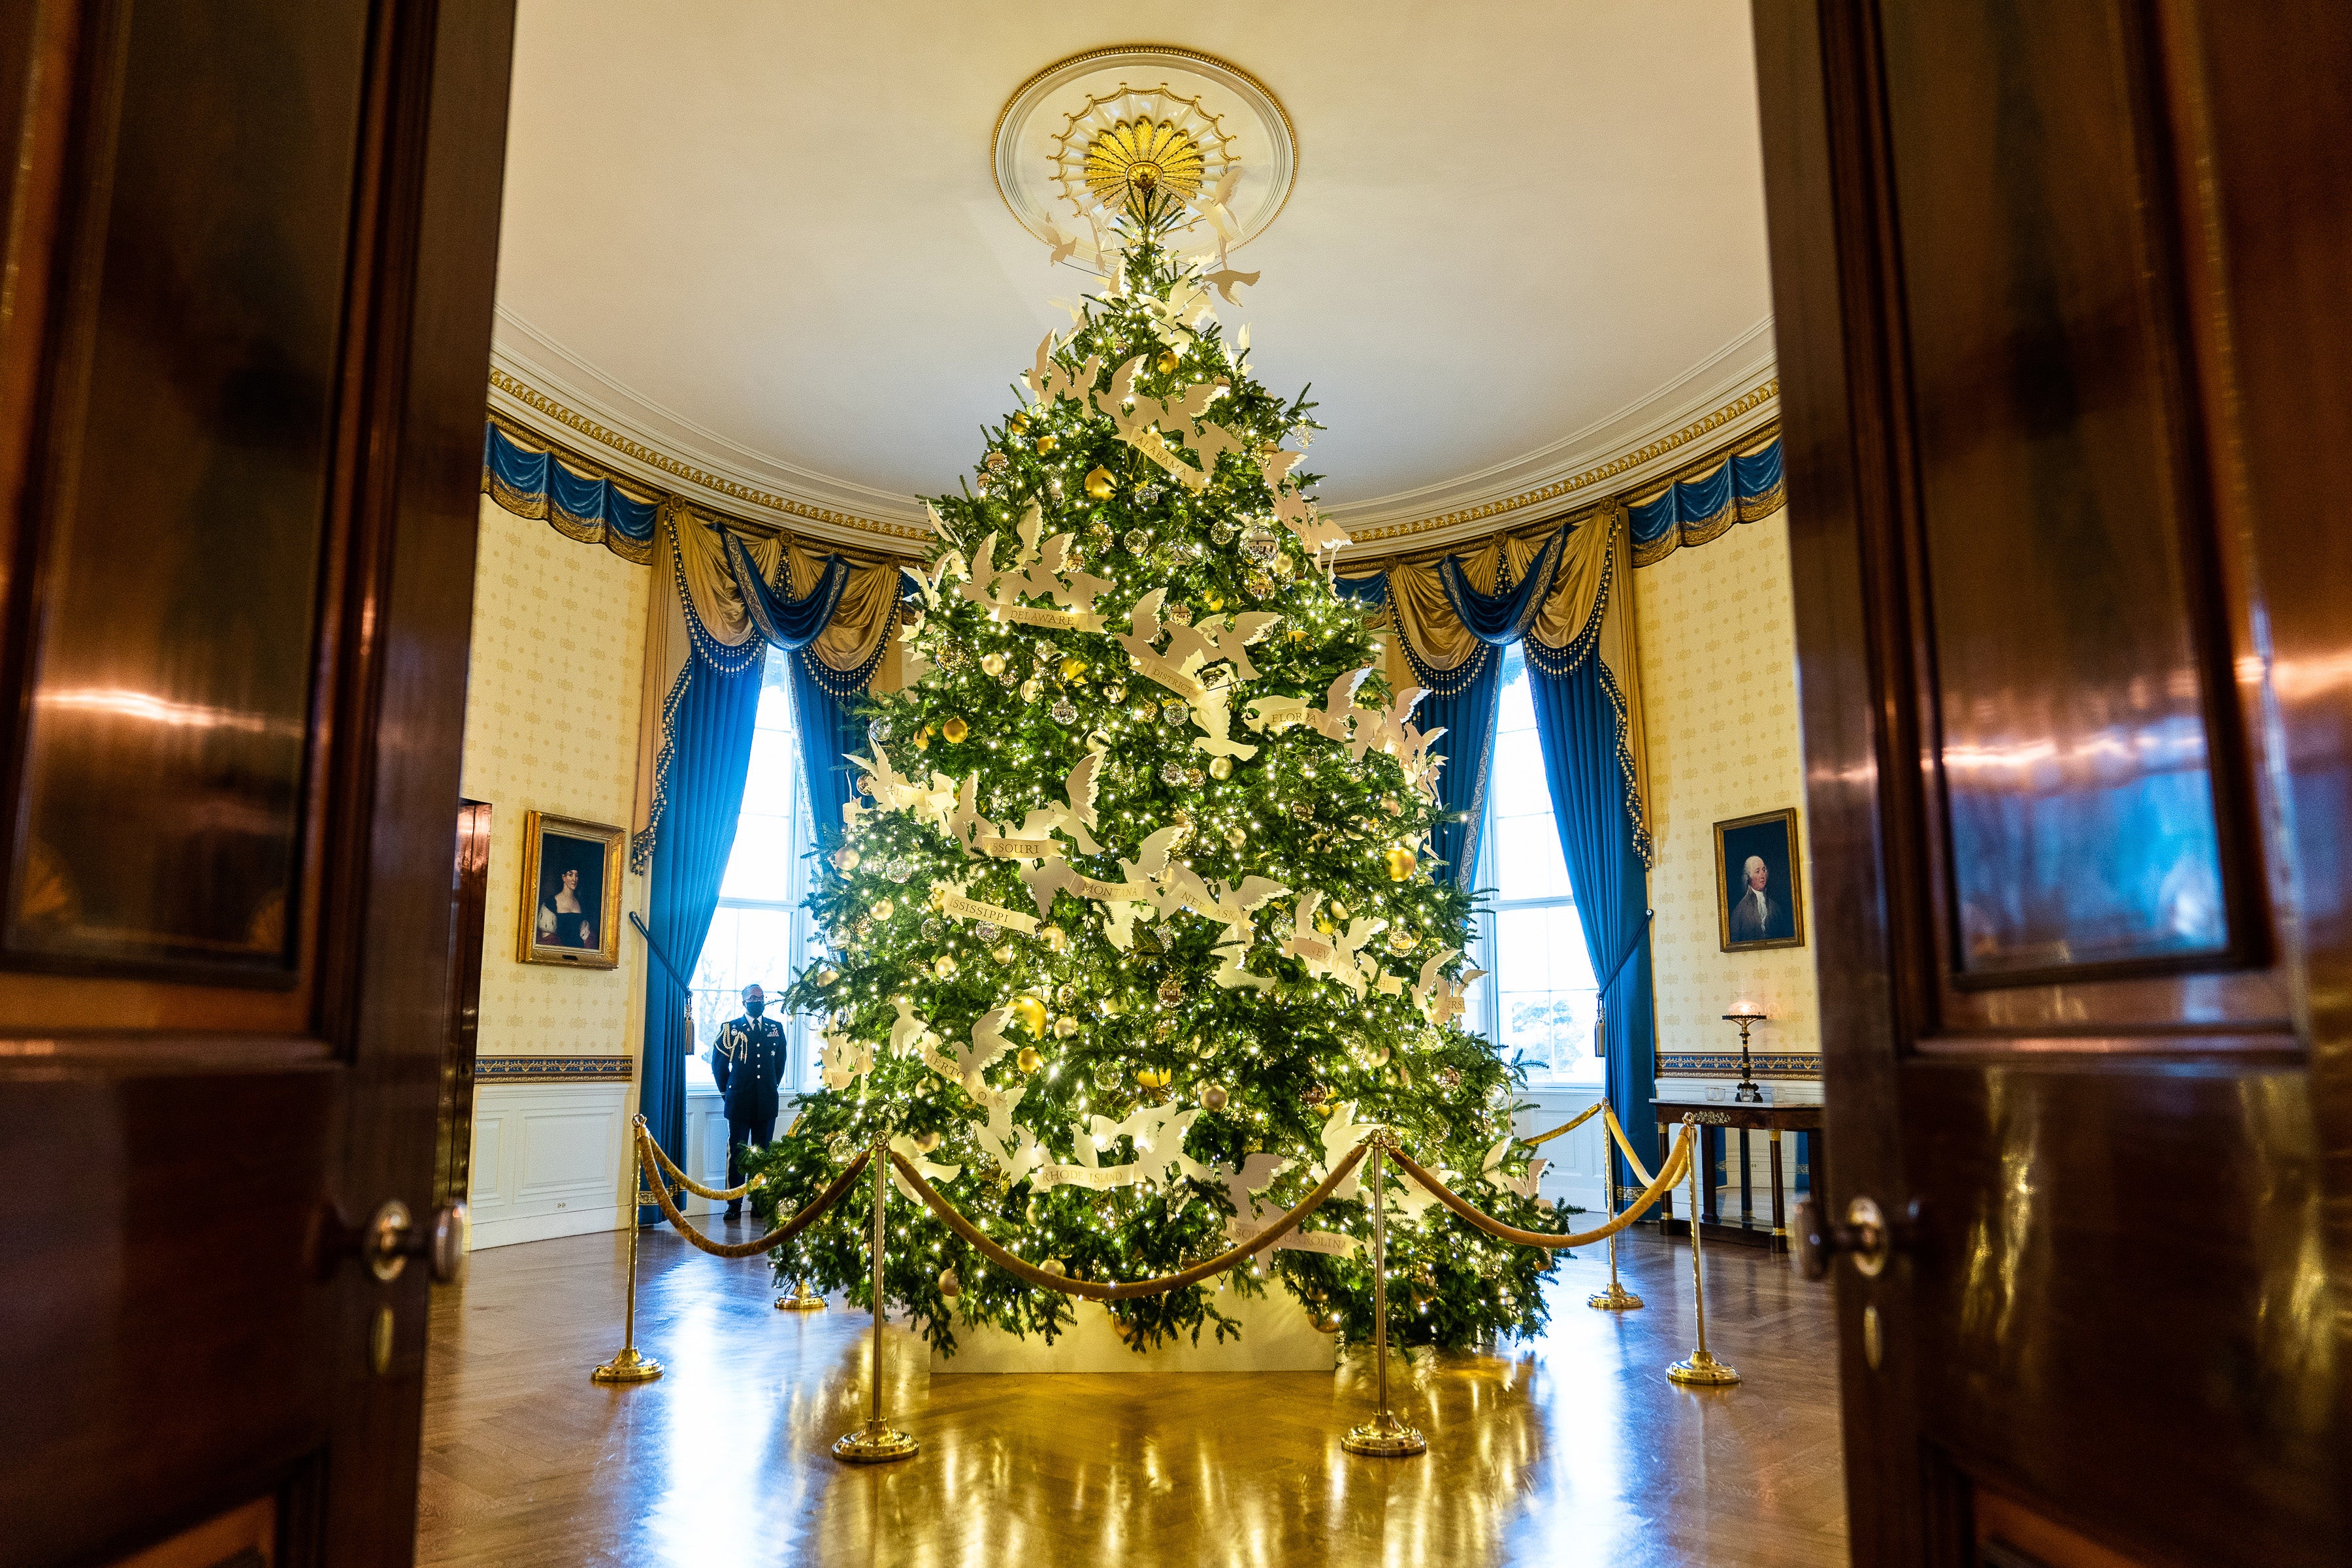 The White House Christmas tree is dotted with peace doves holding white ribbons bearing the name of each state